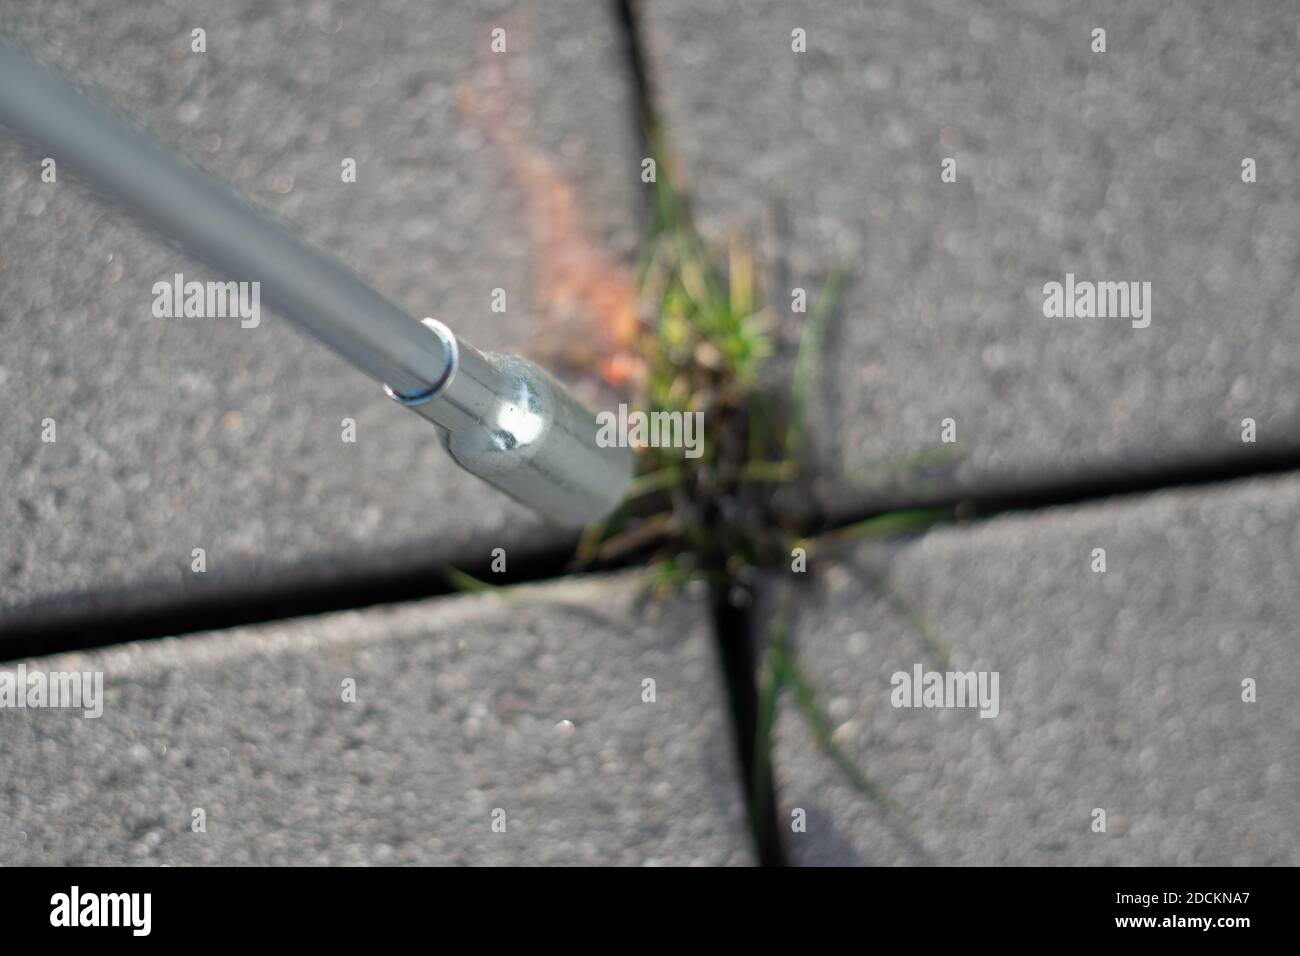 Burning weed out from plate joints with a weed burner Stock Photo